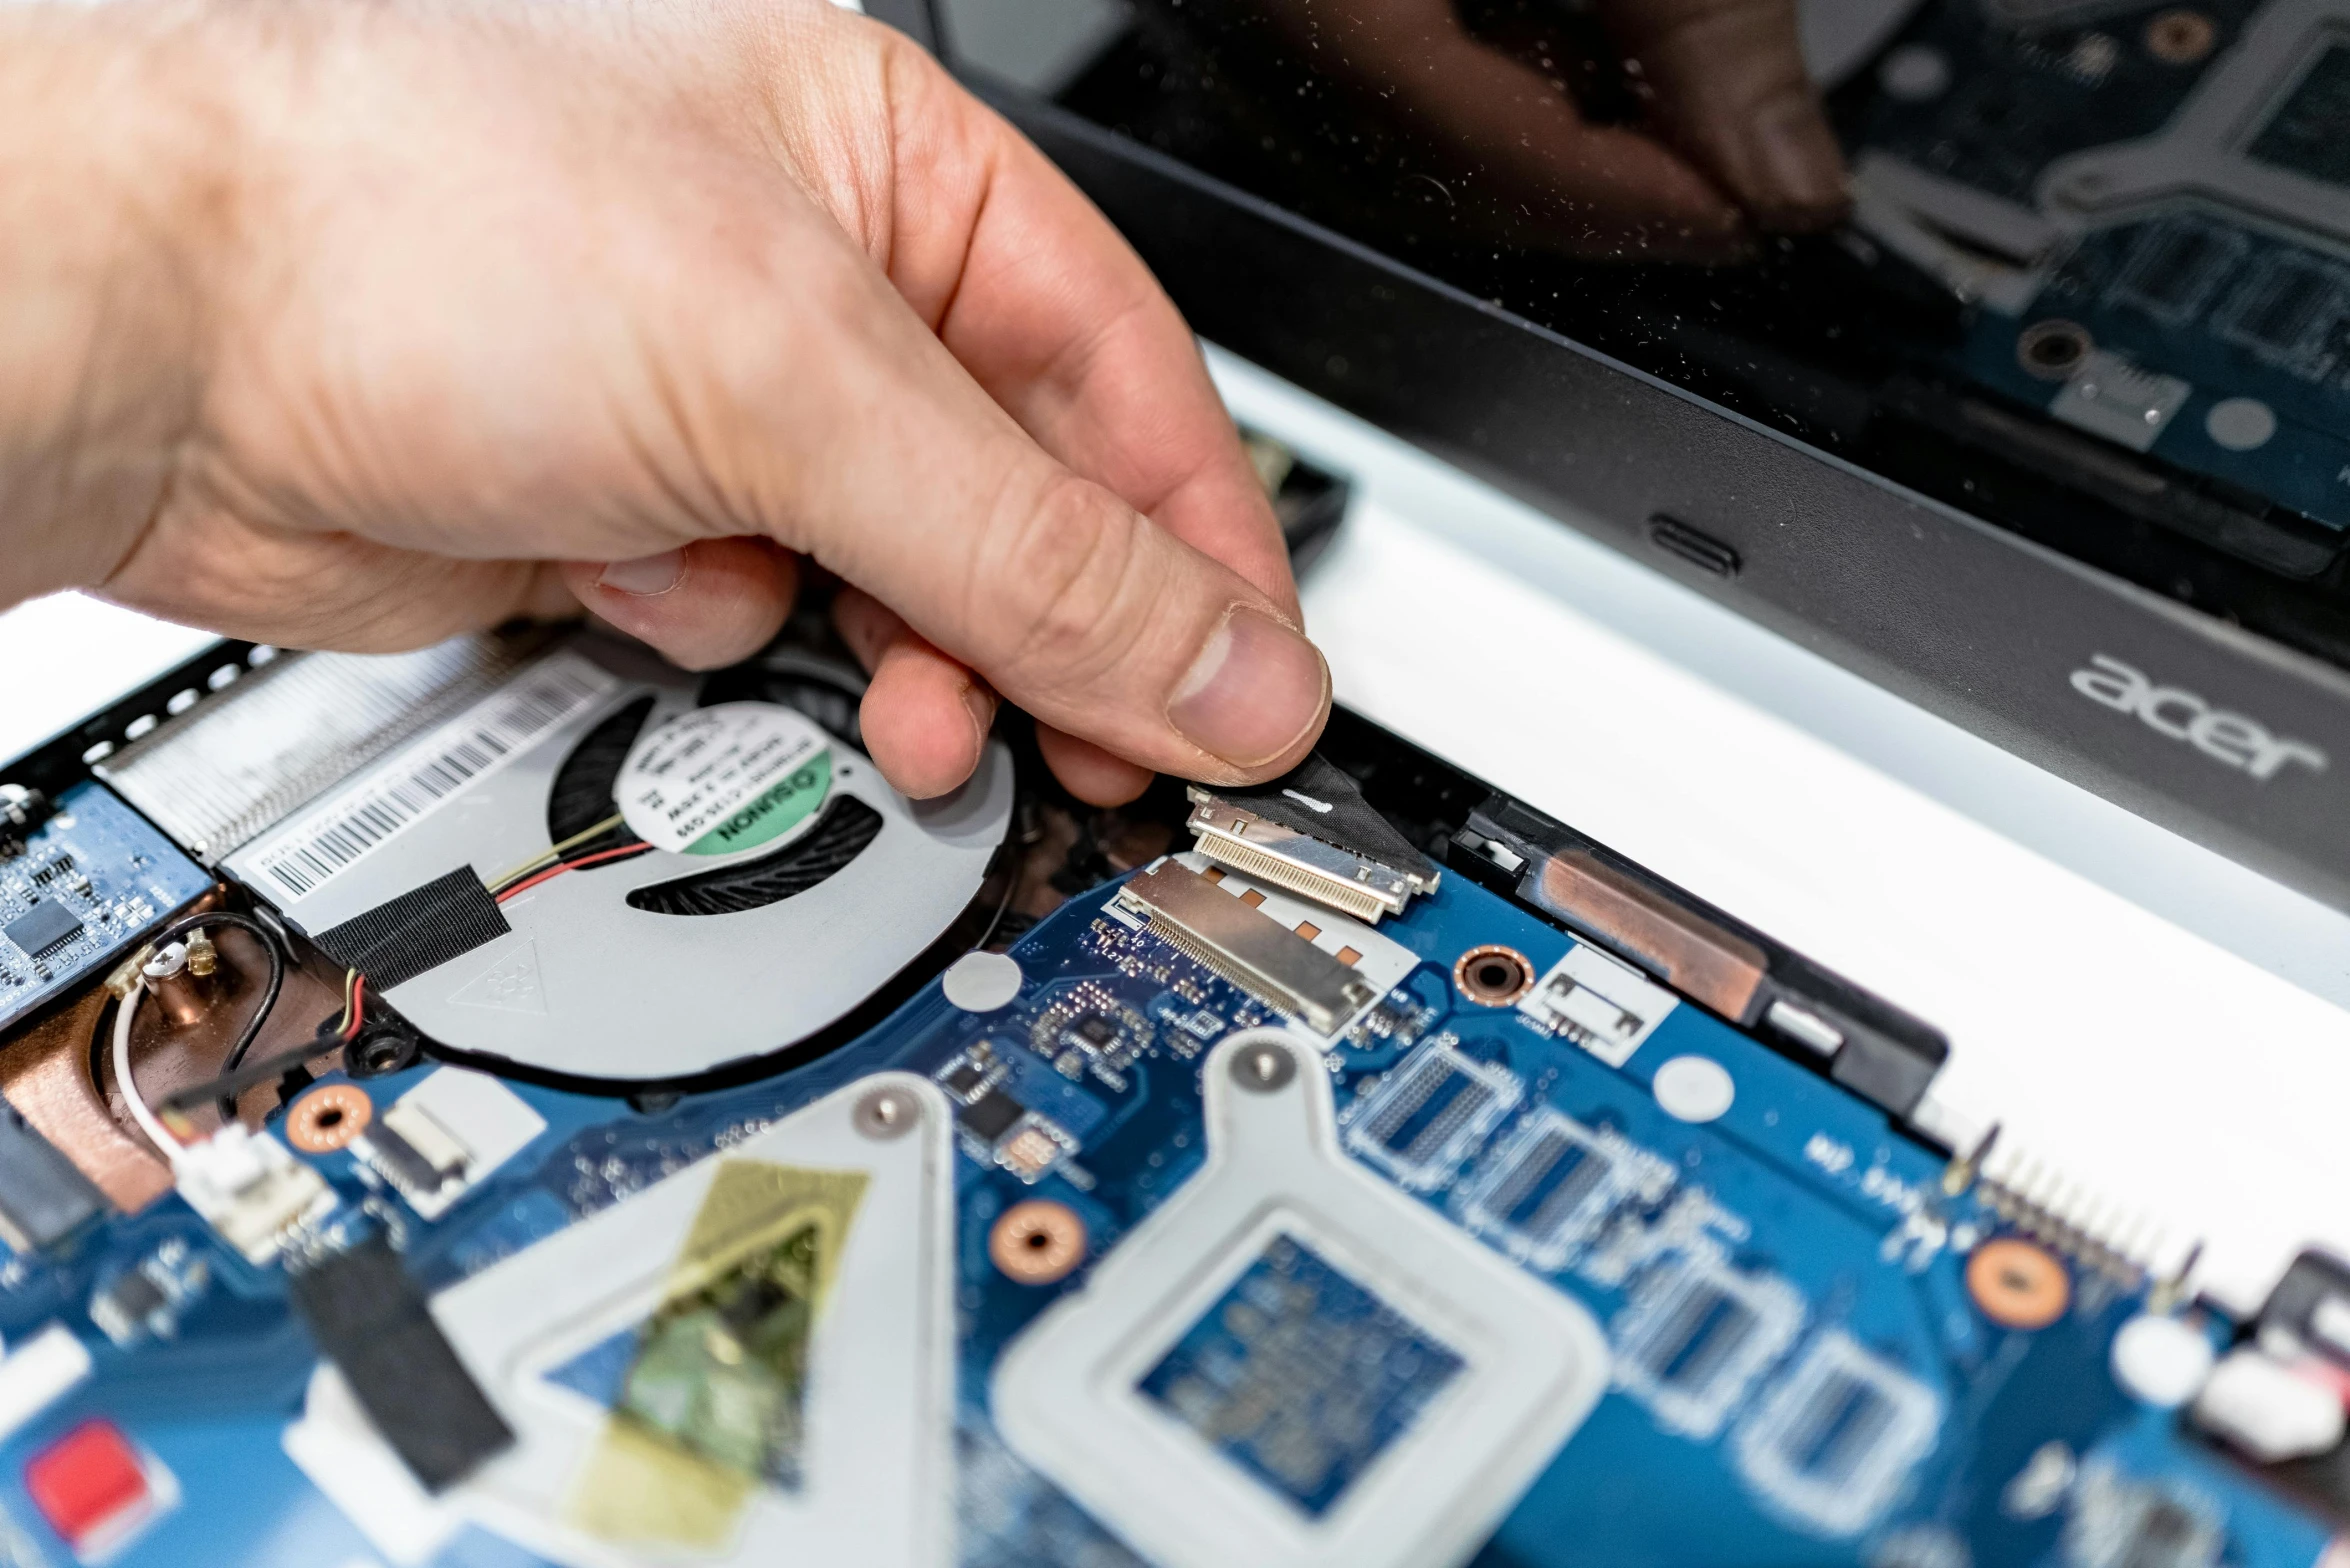 a close up of a person working on a laptop, broken parts, thumbnail, detailed product image, fan favorite